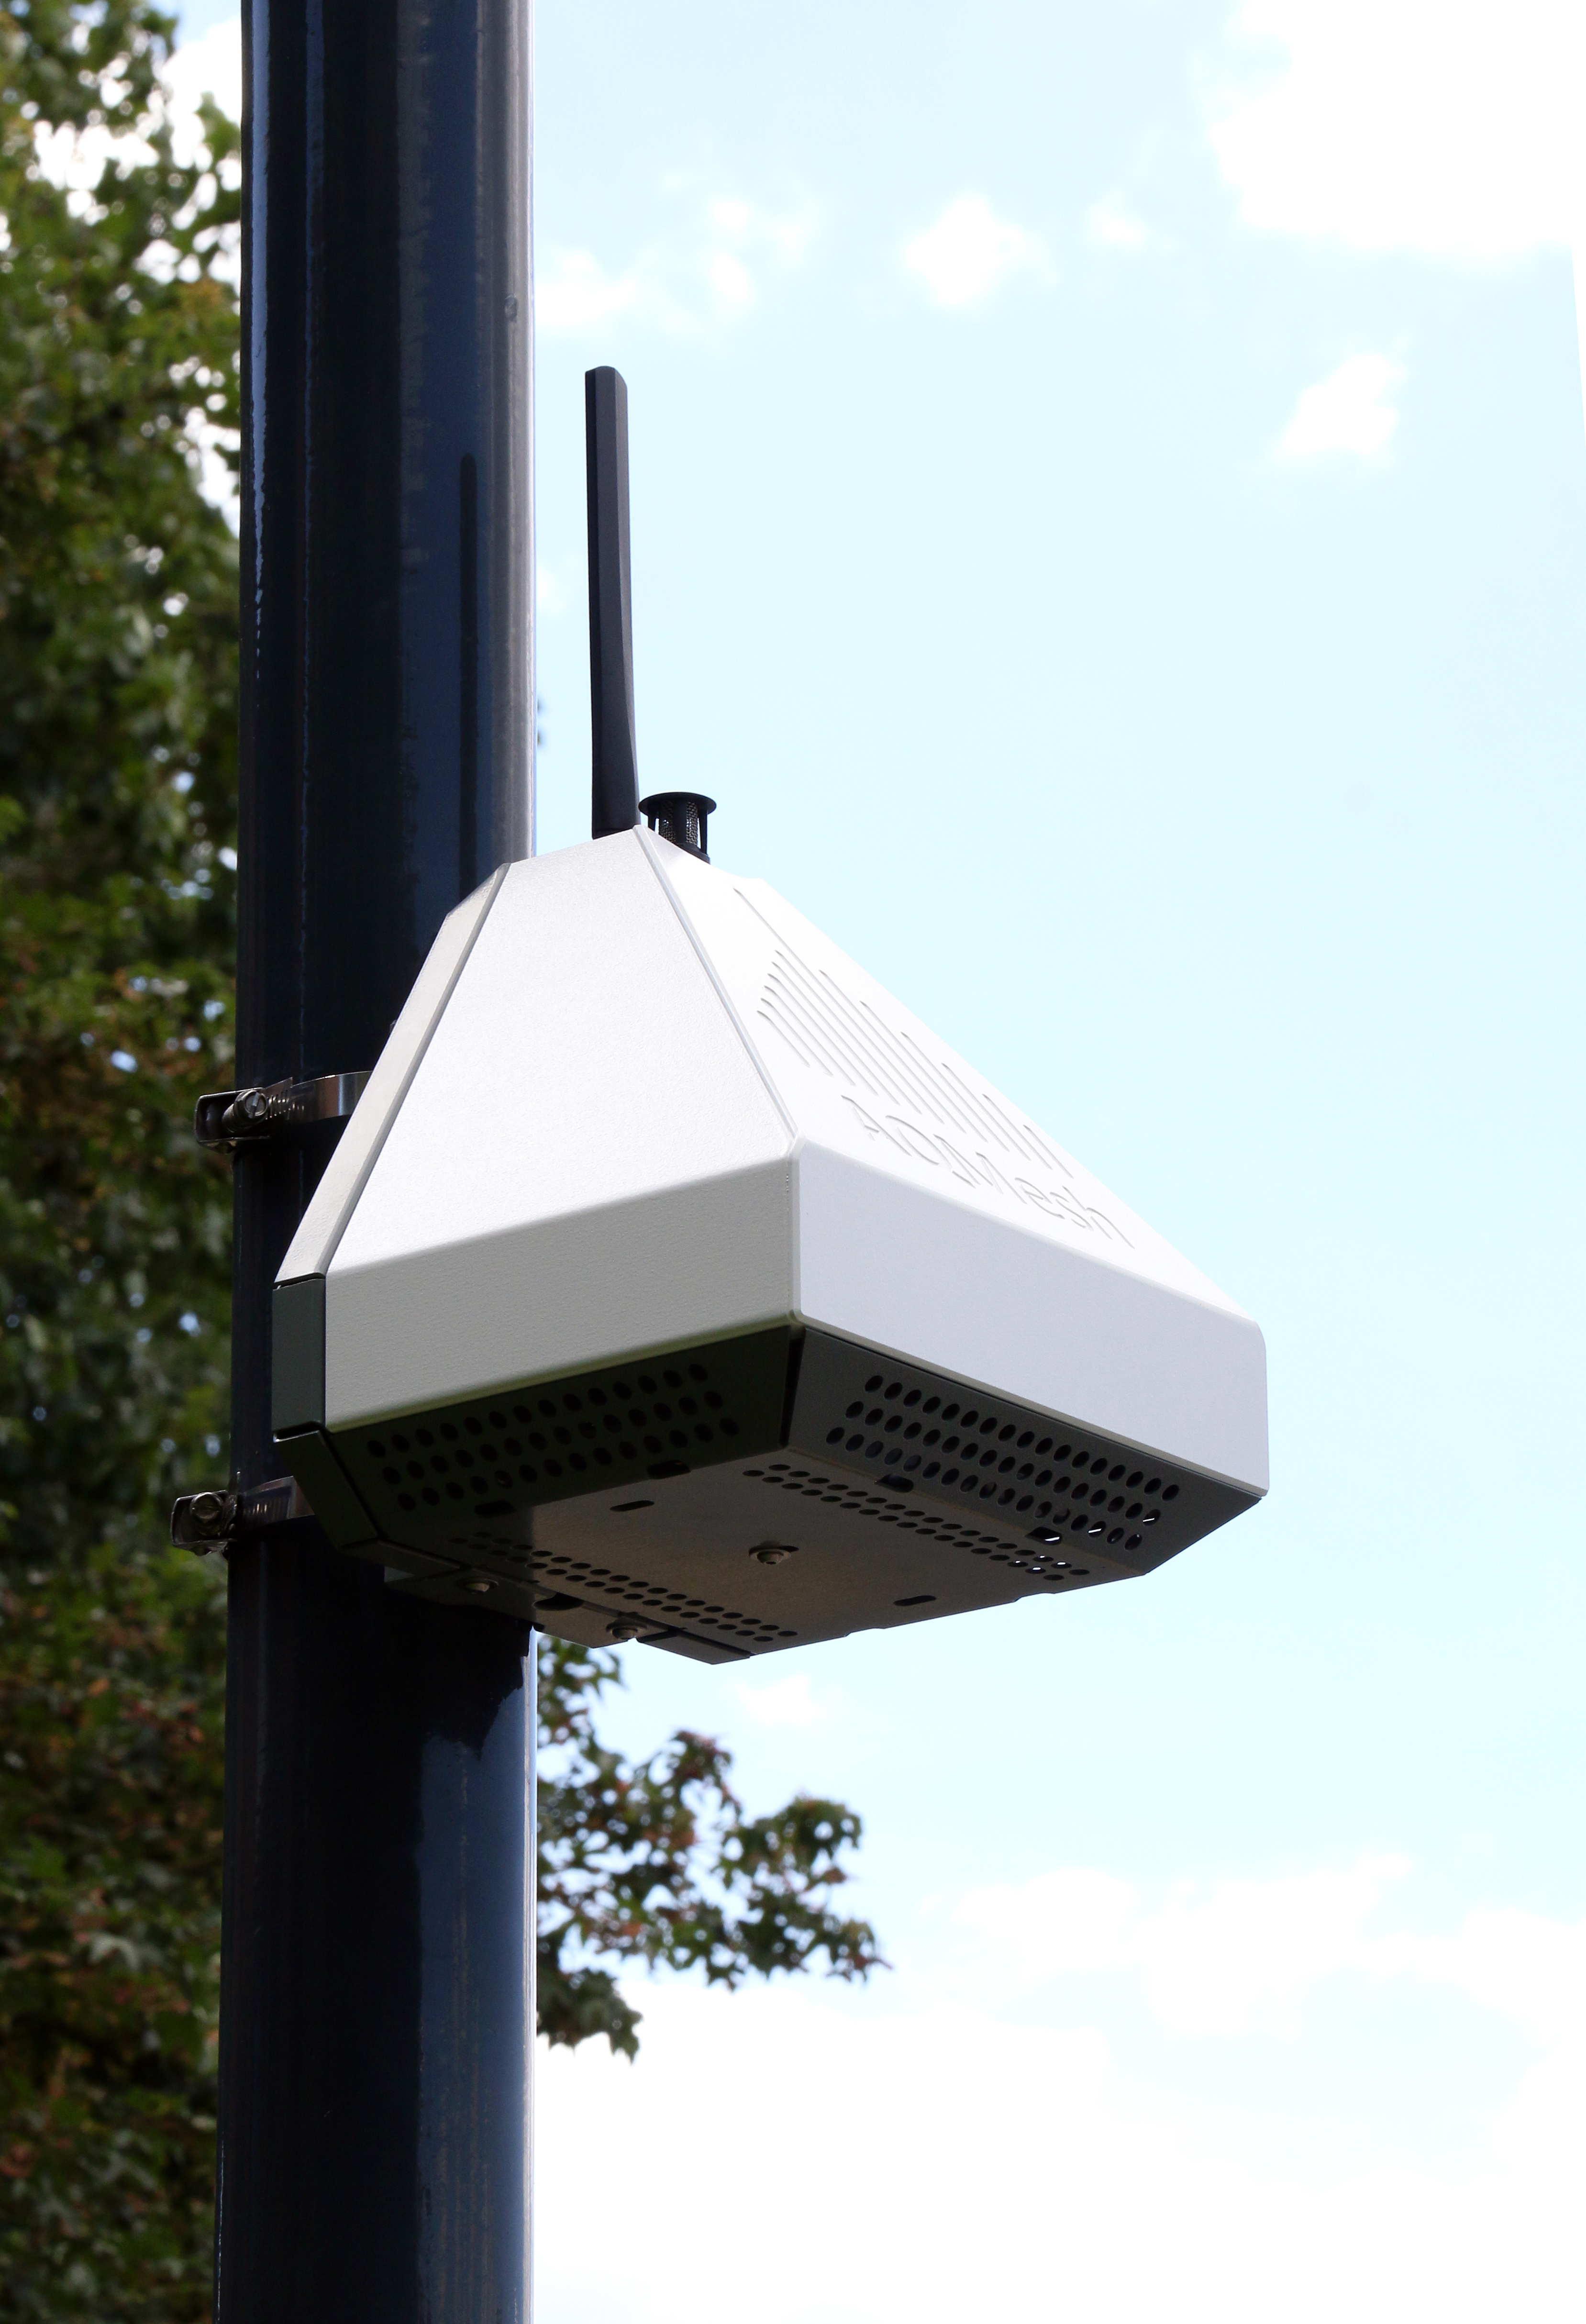 UK local authority uses AQMesh for cost-saving NO2 monitoring network